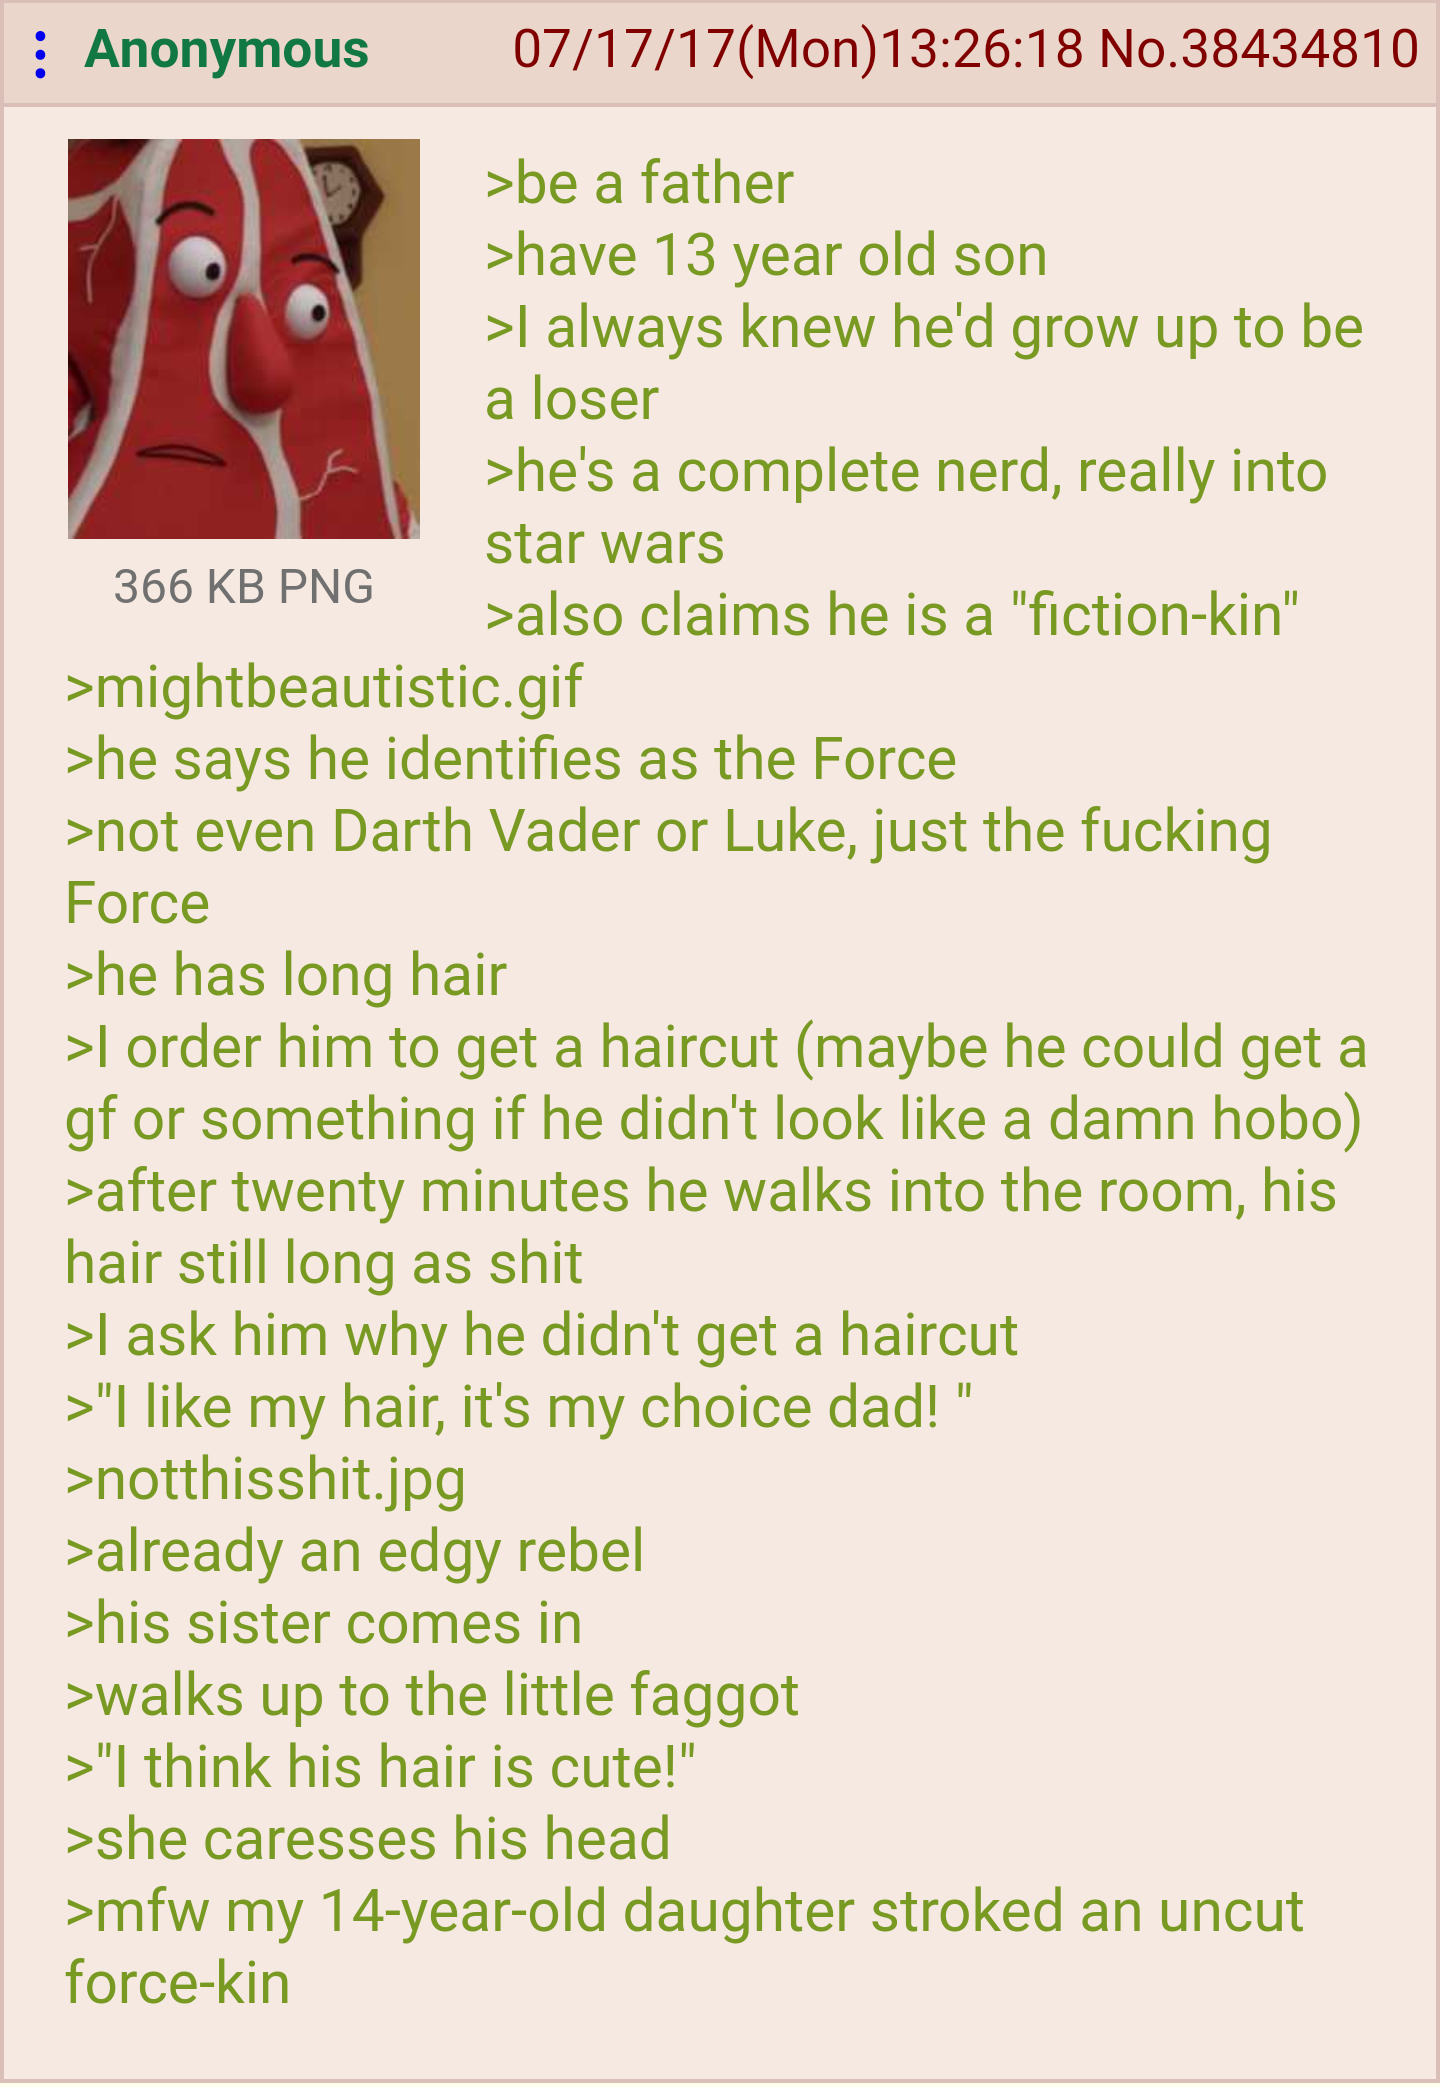 skyrim greentext - Anonymous 071717Mon18 No.38434810 >be a father >have 13 year old son >I always knew he'd grow up to be a loser >he's a complete nerd, really into star wars 366 Kb Png >also claims he is a "fictionkin" >mightbeautistic.gif >he says he id